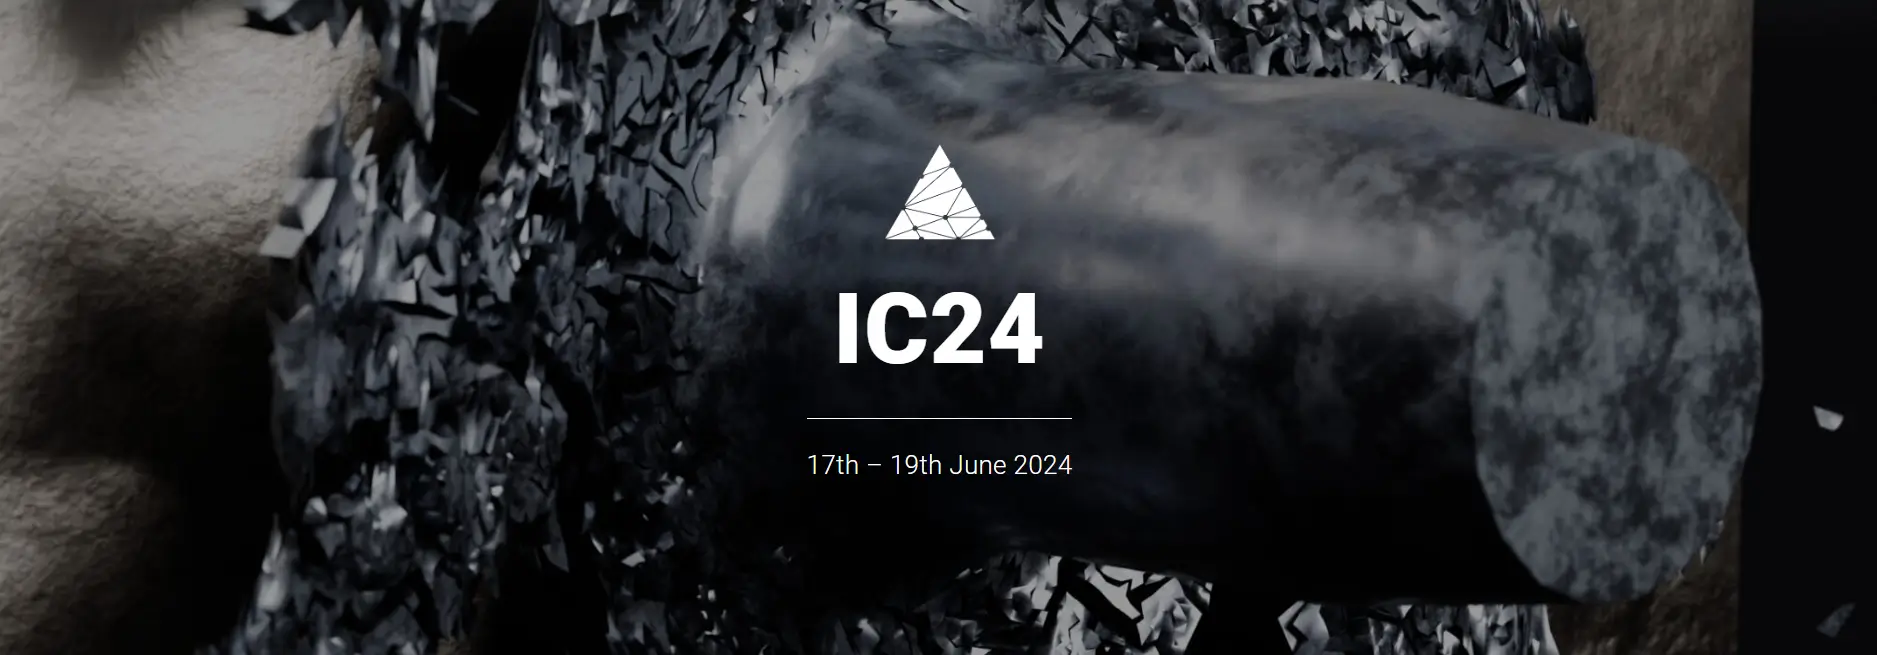 A black and white image of the logo for ic 2 4.